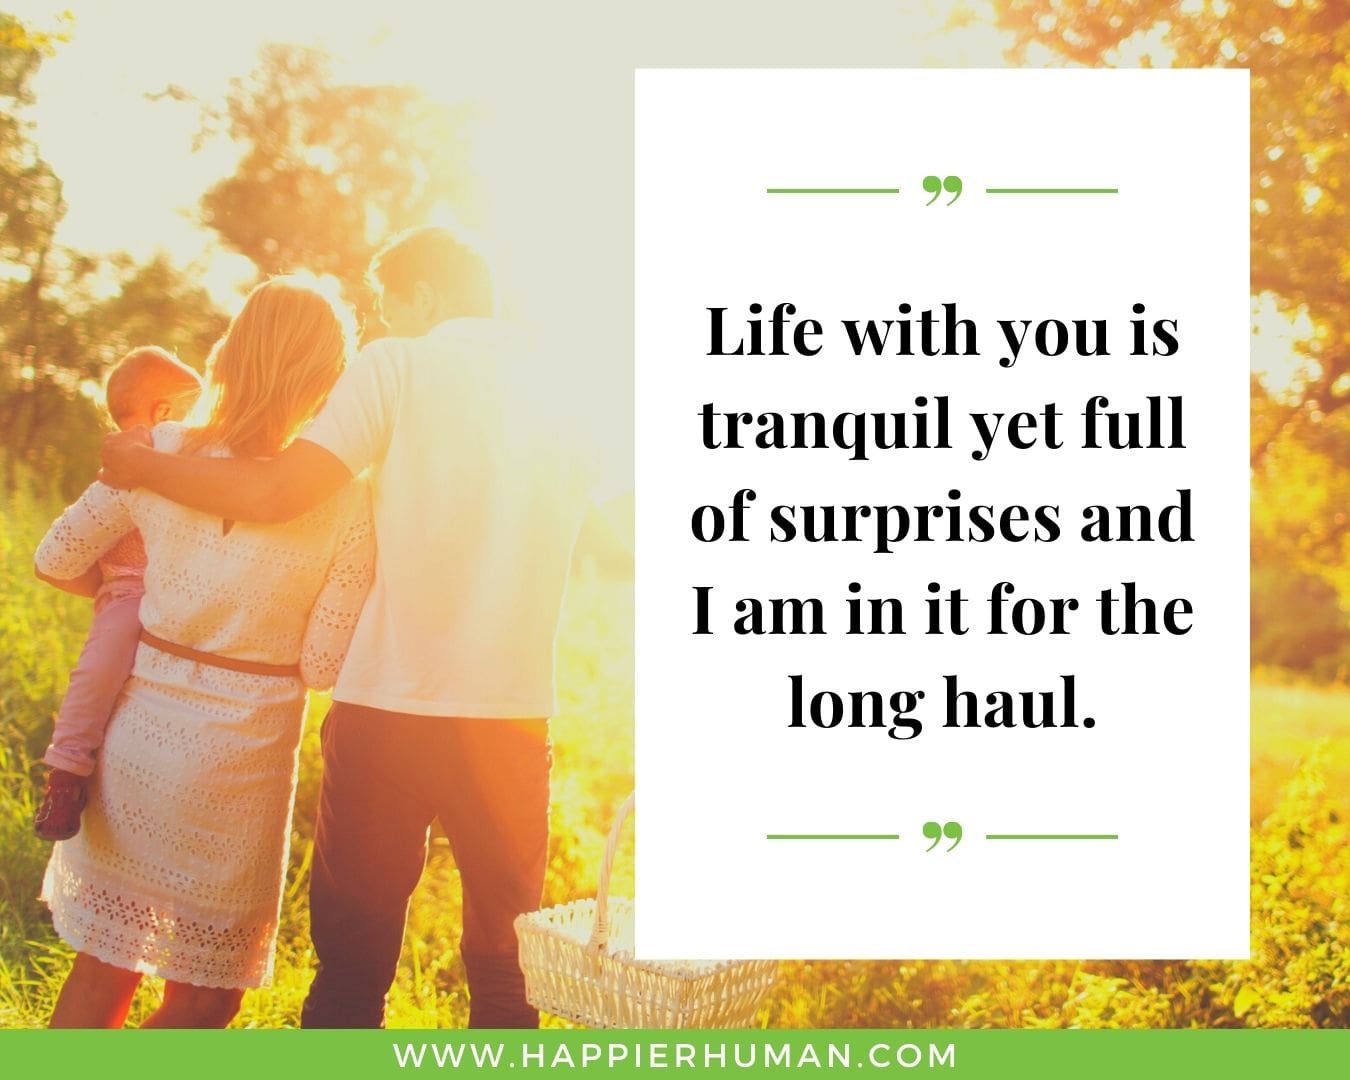 Cute and Romantic Love Quotes for Her - “Life with you is tranquil yet full of surprises and I am in it for the long haul.”